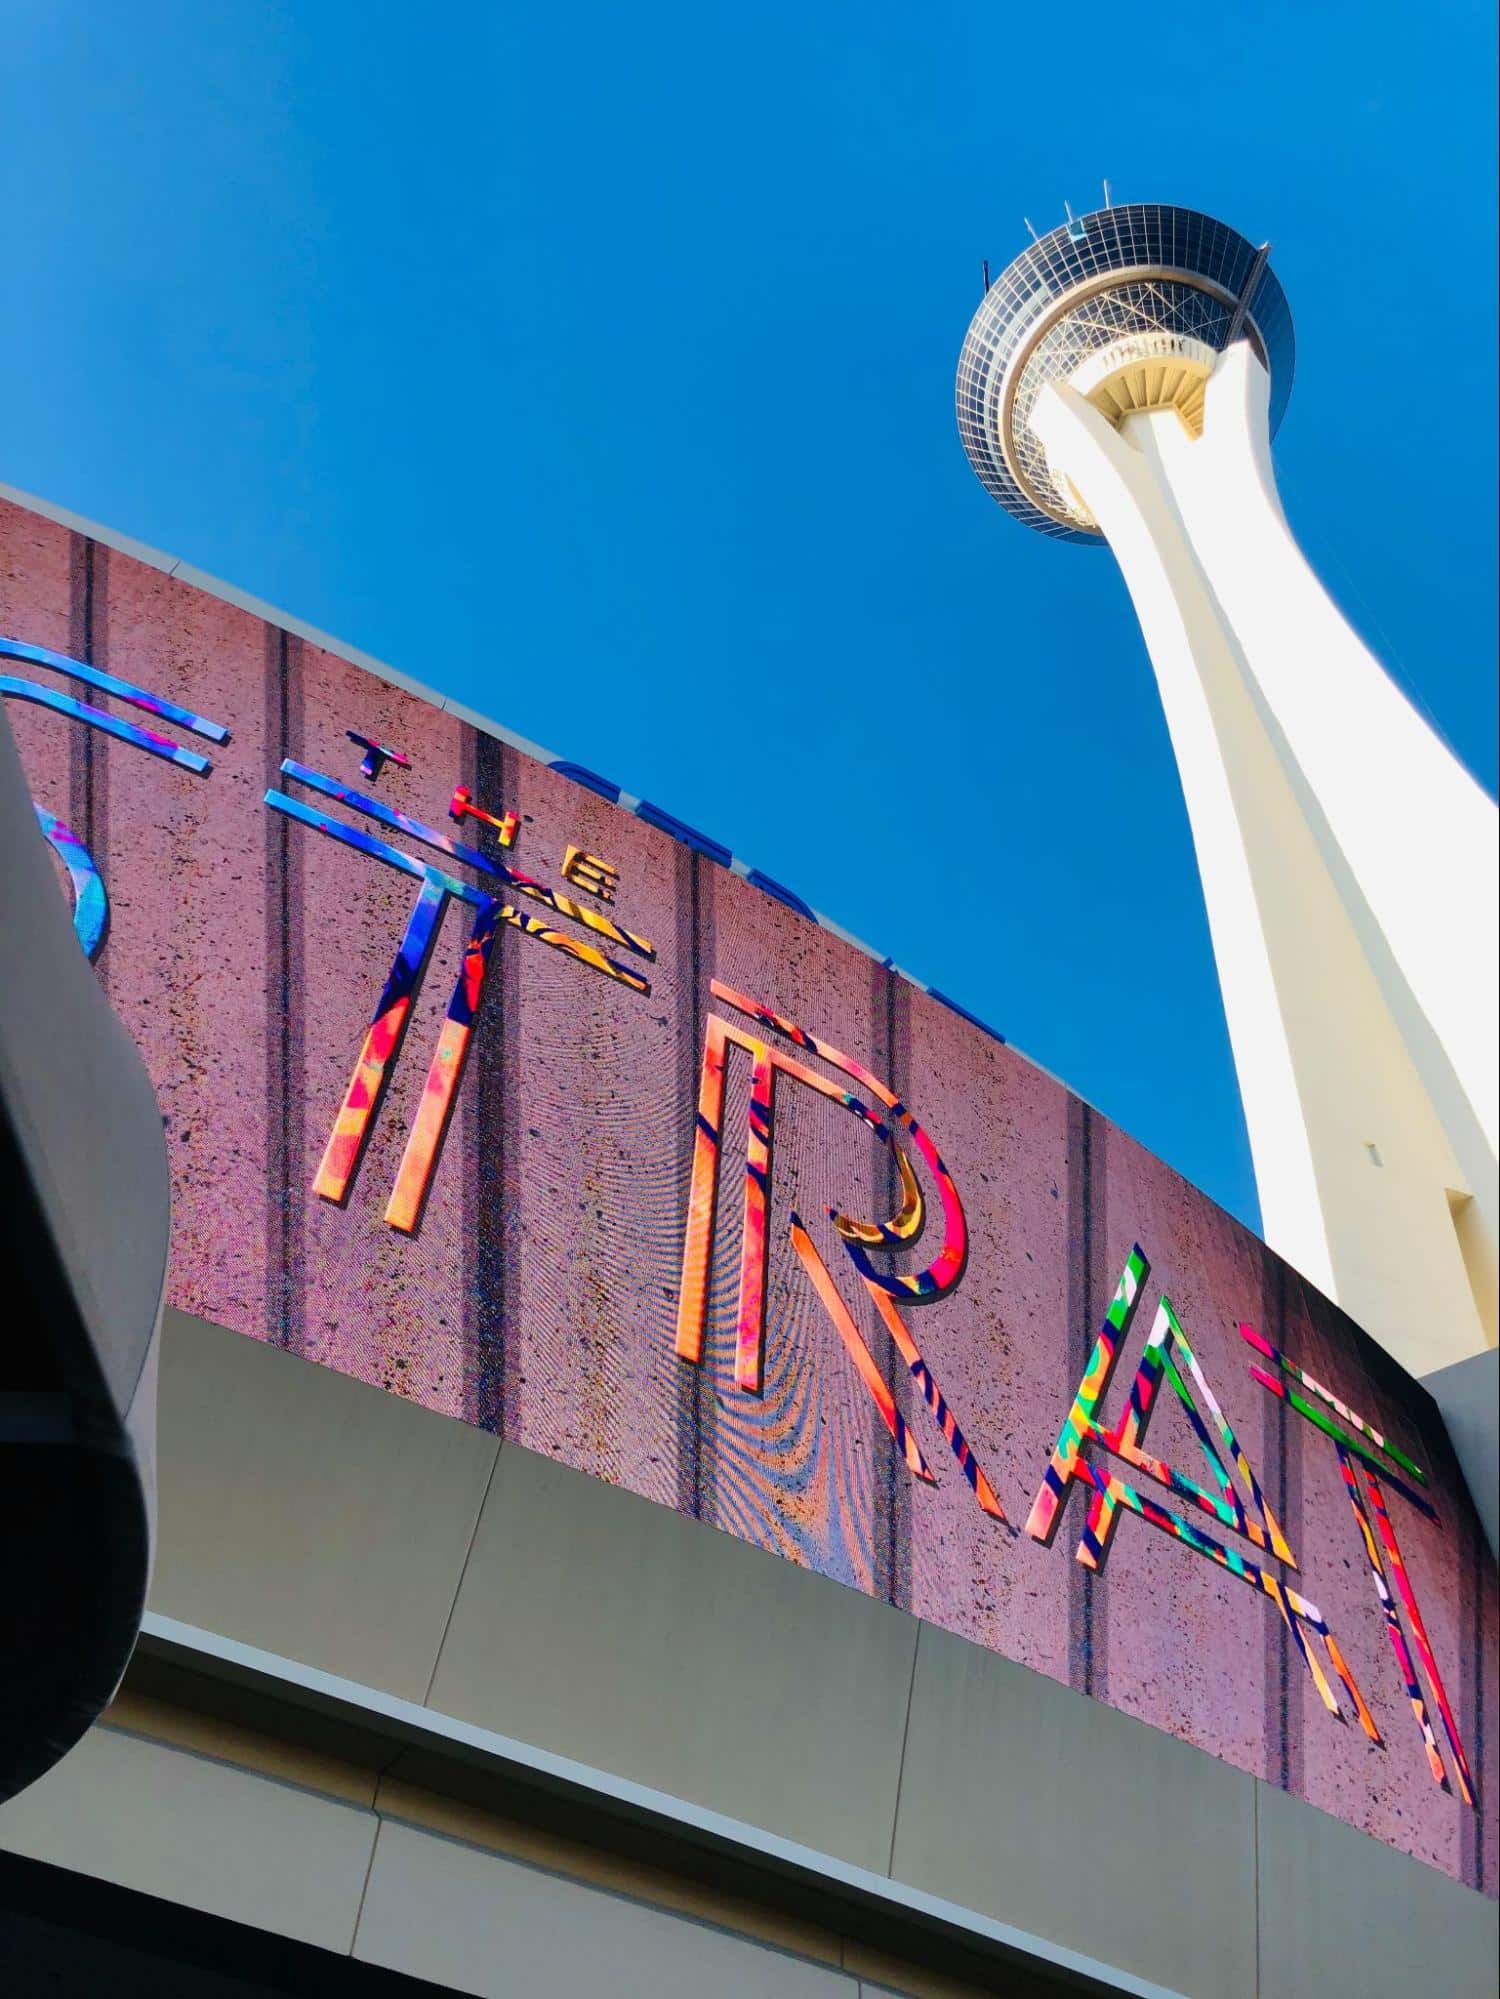 For the best views in Vegas, book The Strat on of the best group destinations